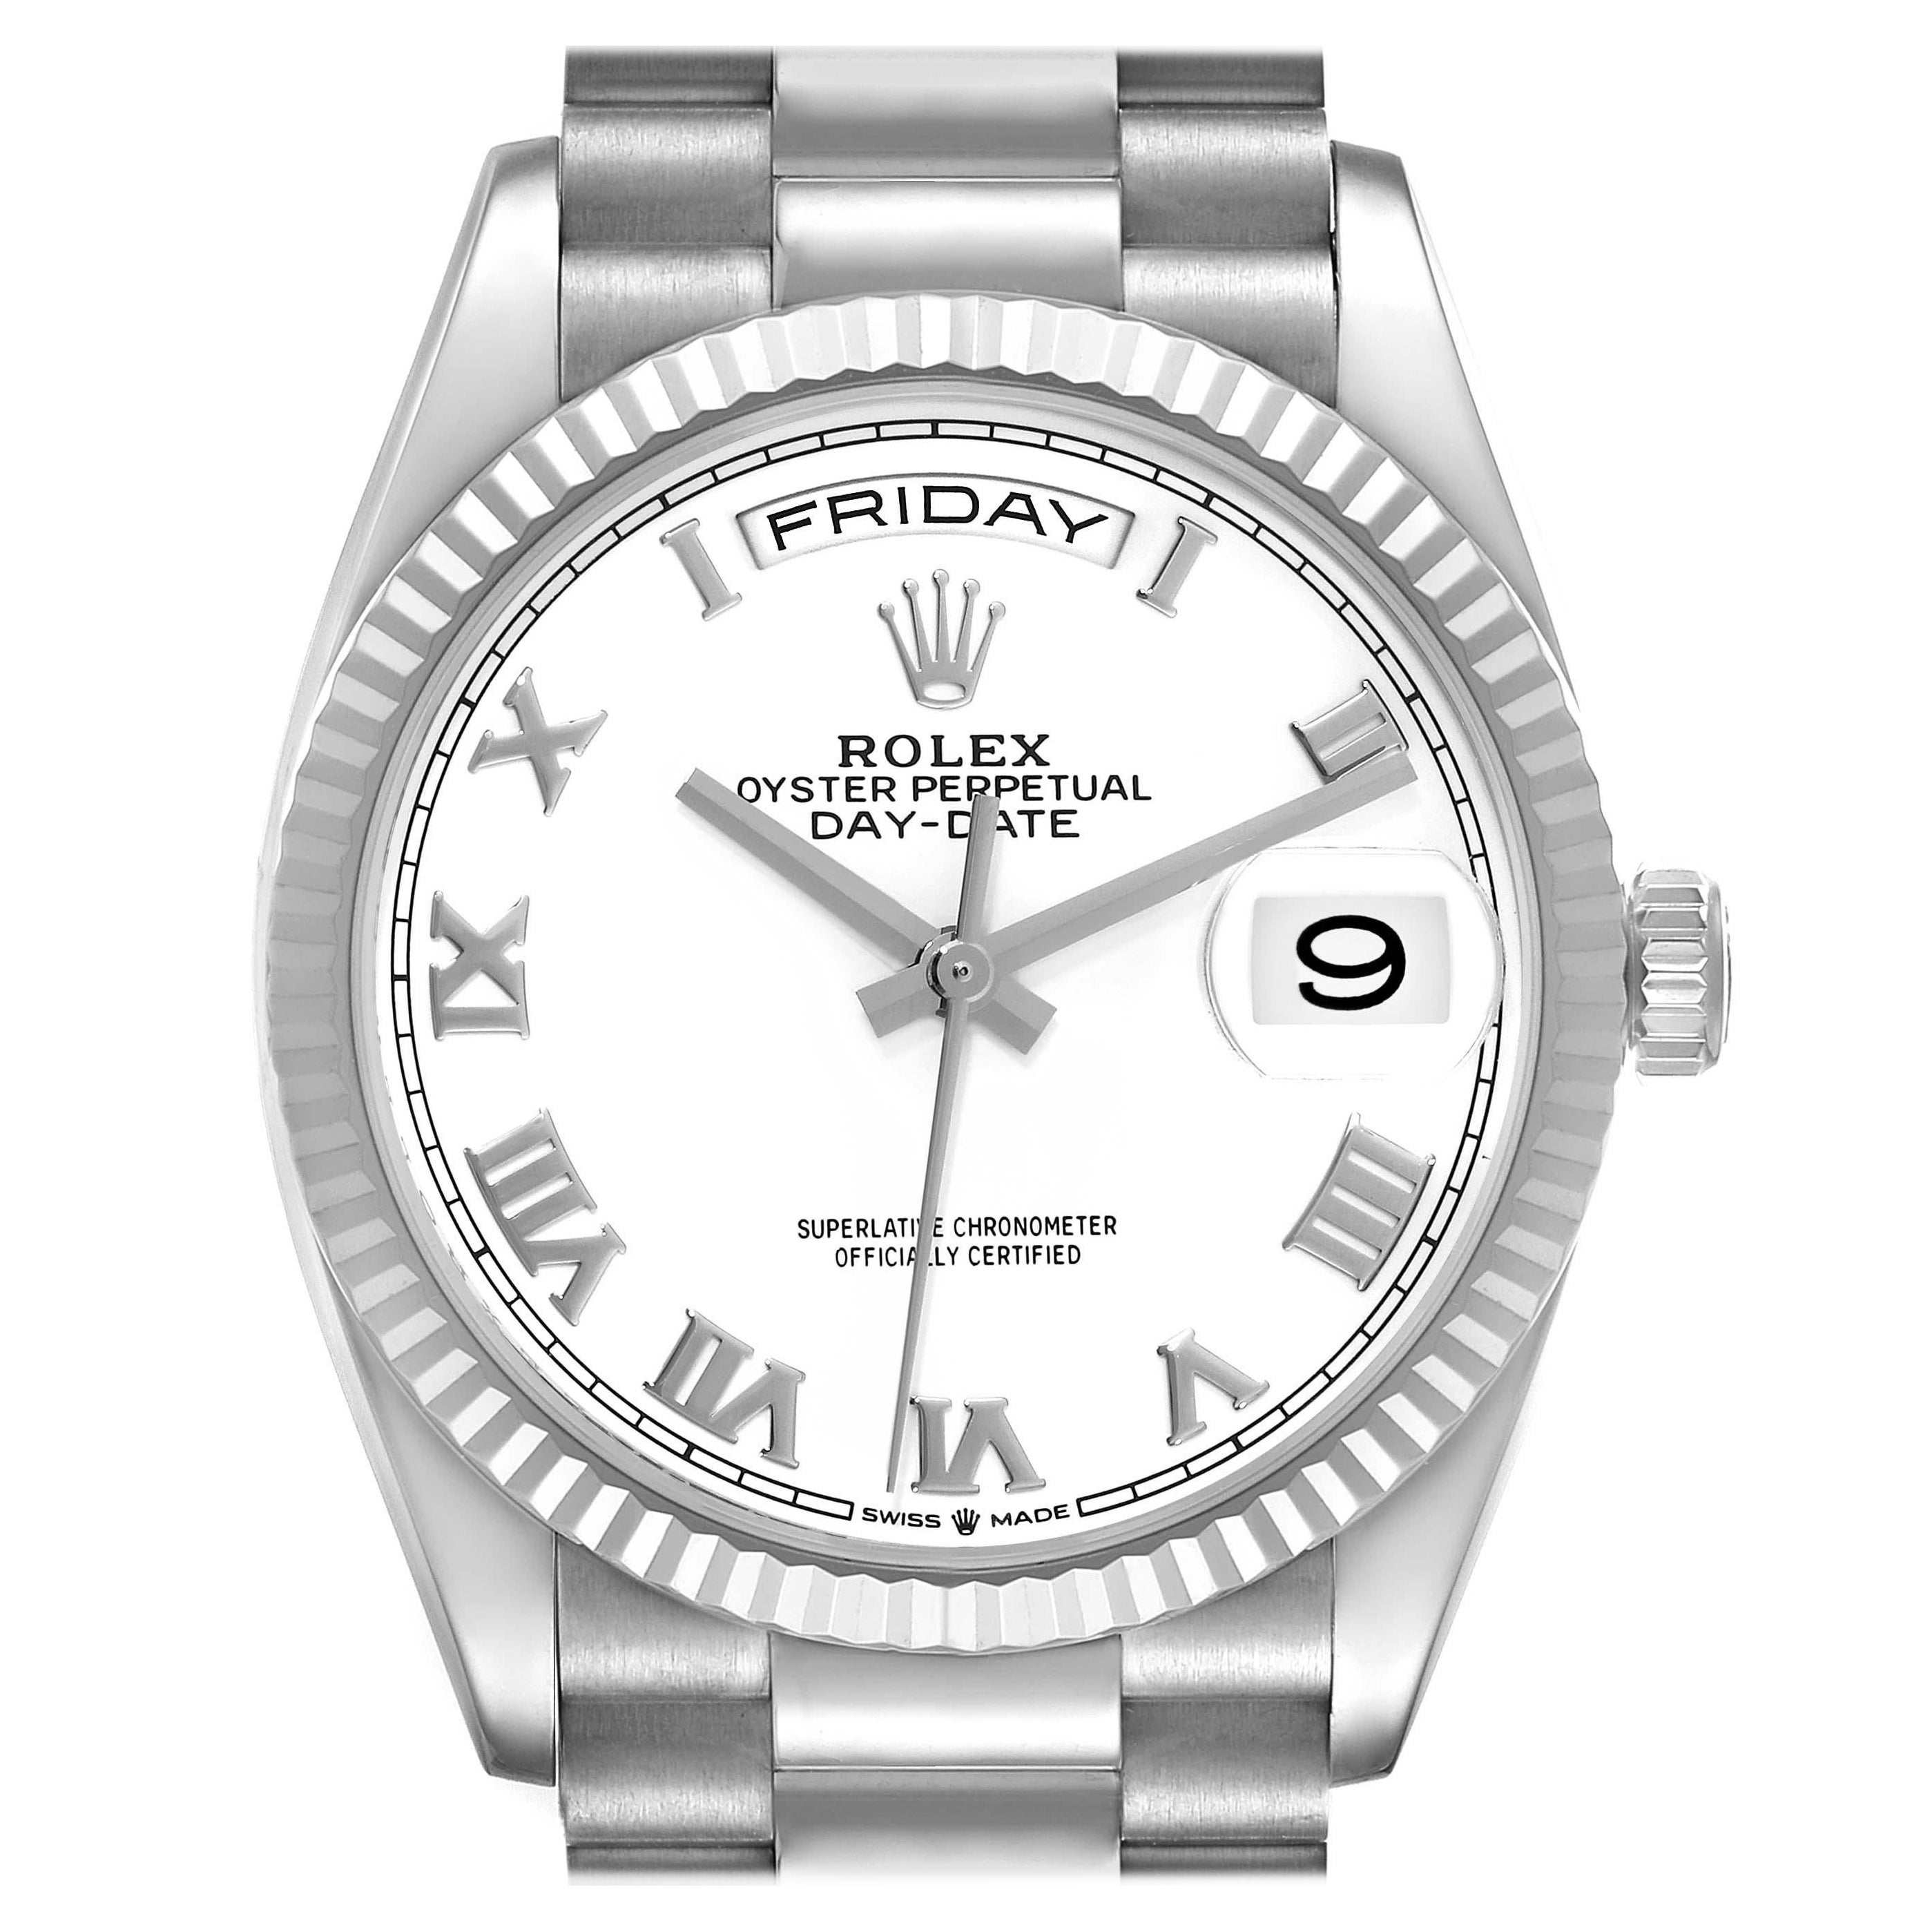 Rolex Day Date 36mm President White Gold White Dial Mens Watch 128239 Box Card For Sale